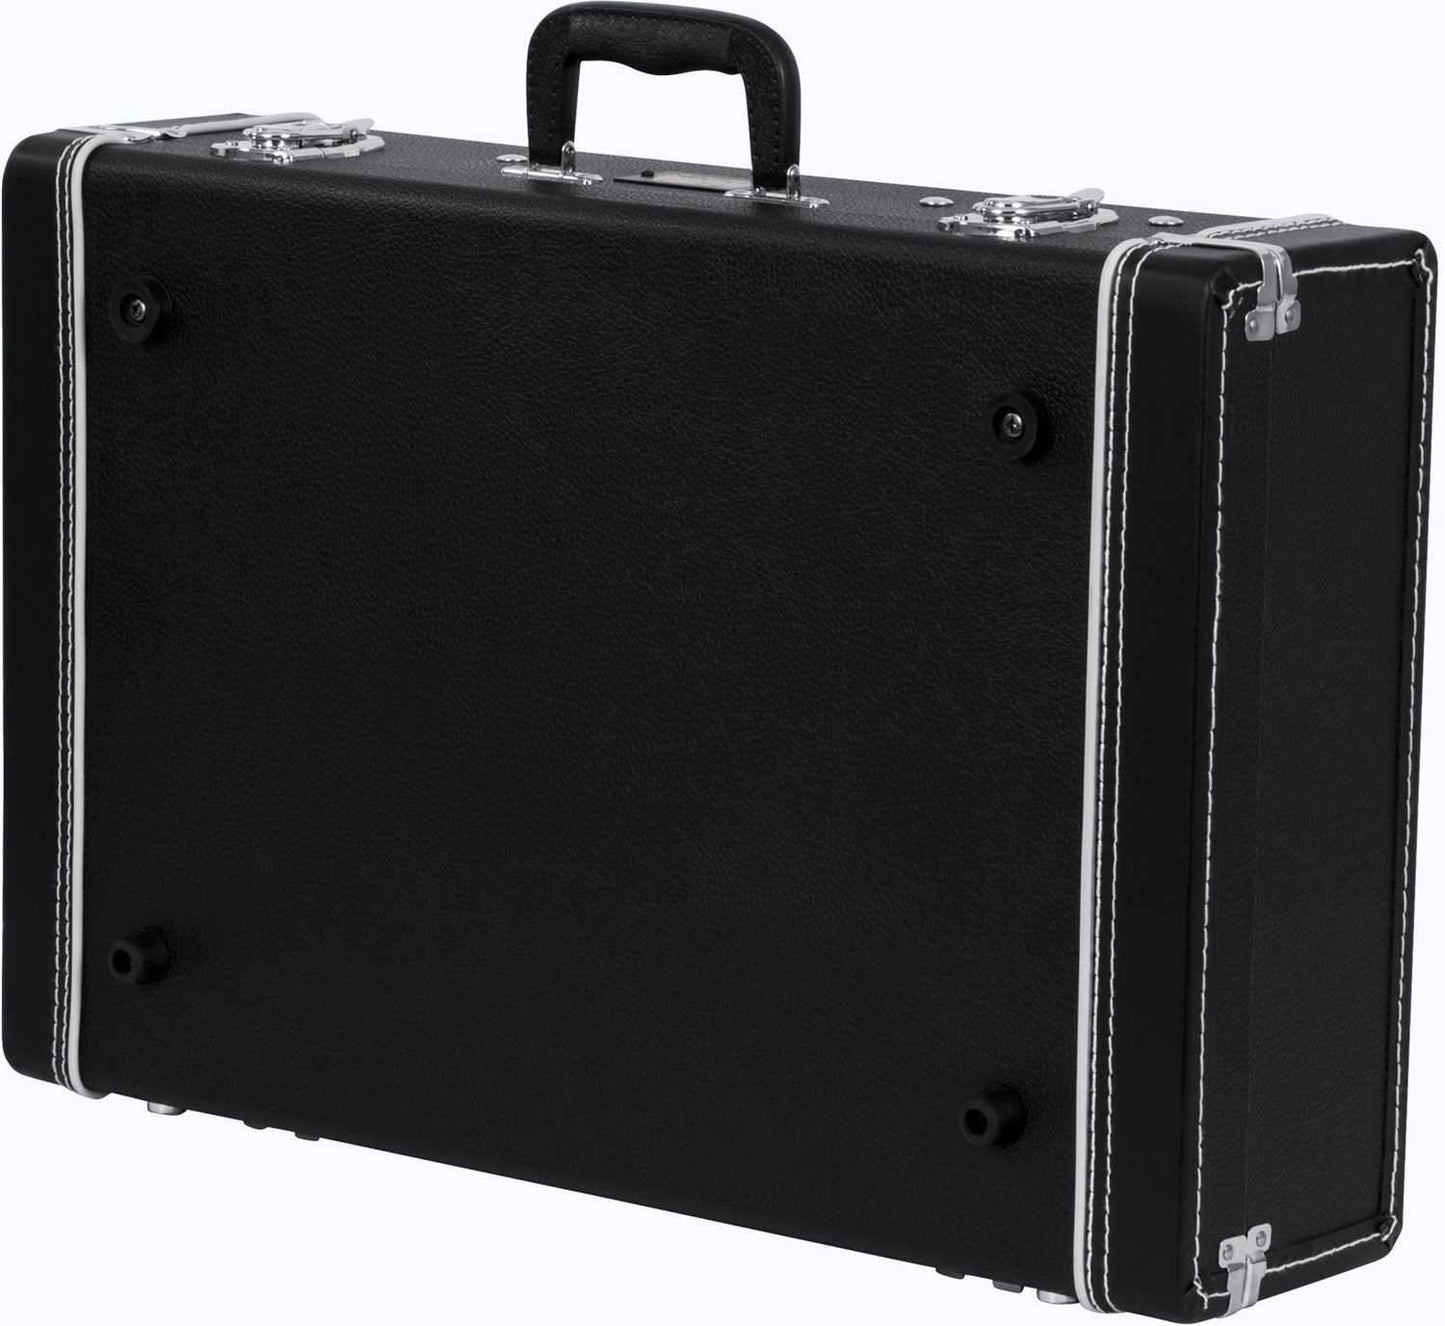 Gator Gig-Box Jr Pedal Board/Guitar Stand Case - ProSound and Stage Lighting